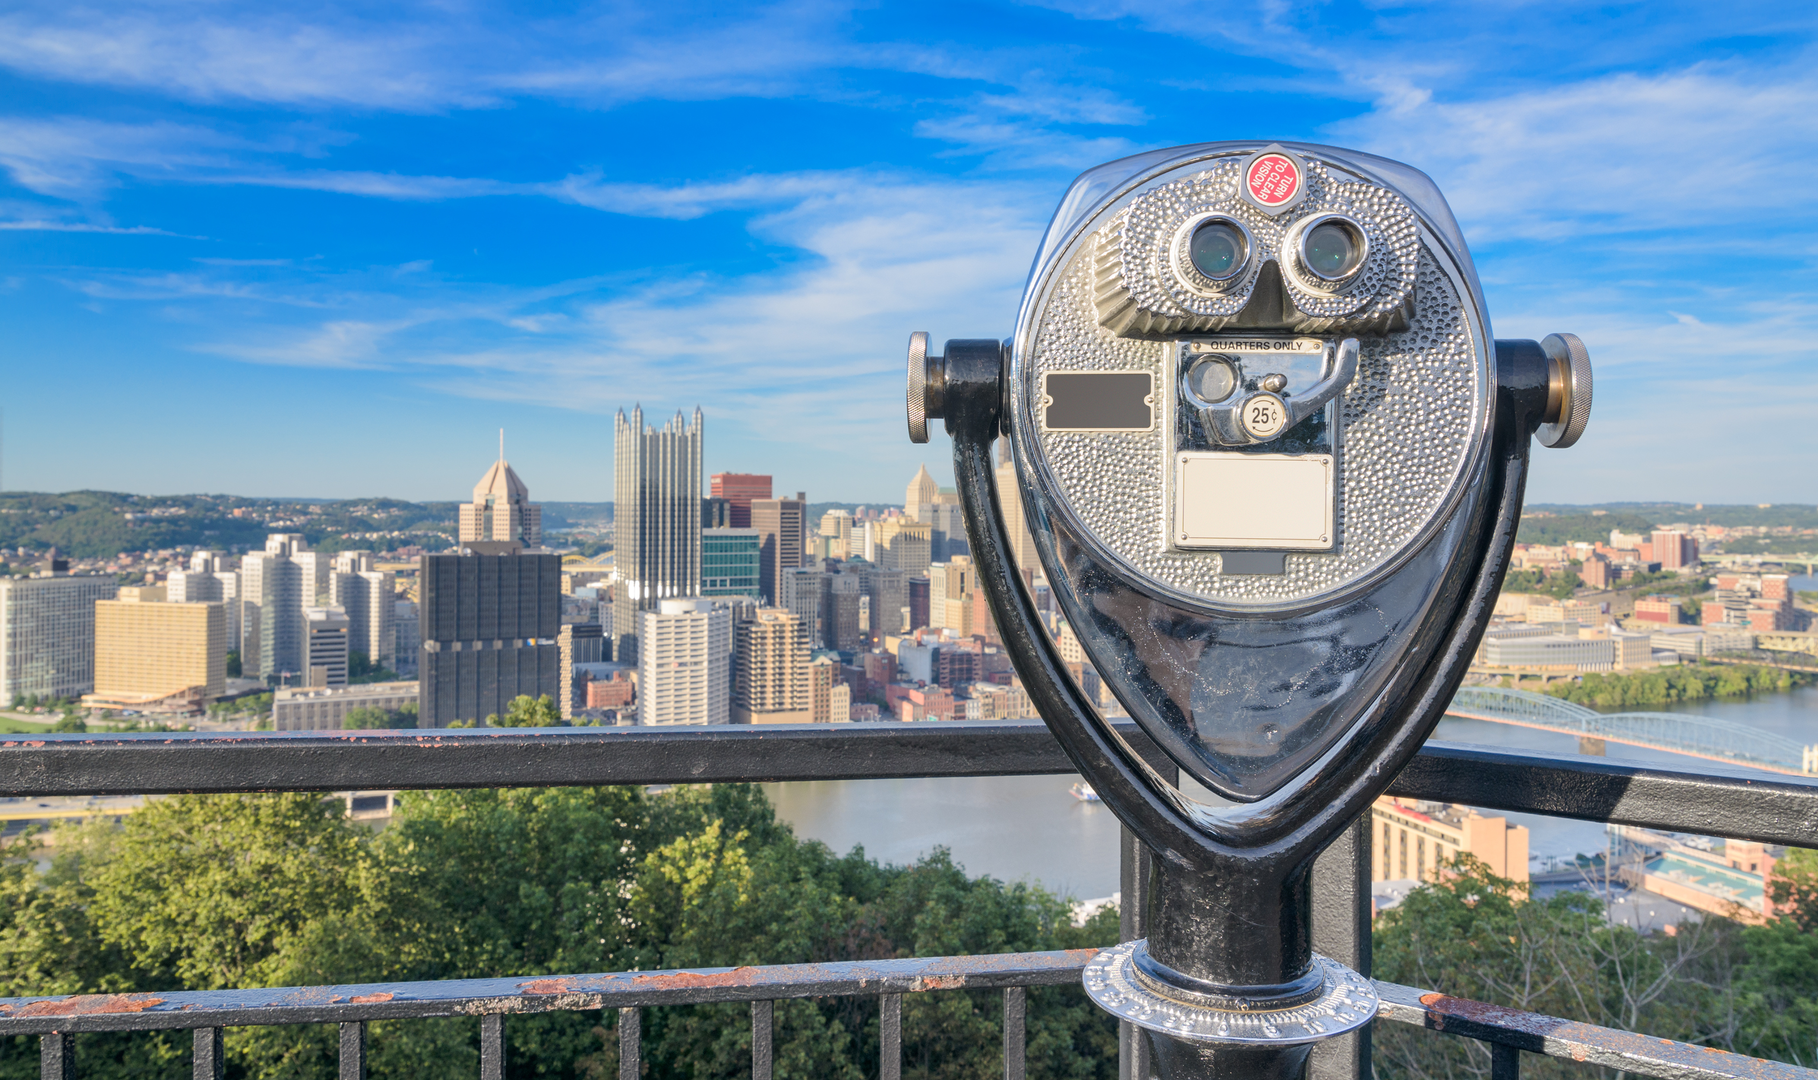 Rooftop binoculars looking out over a city